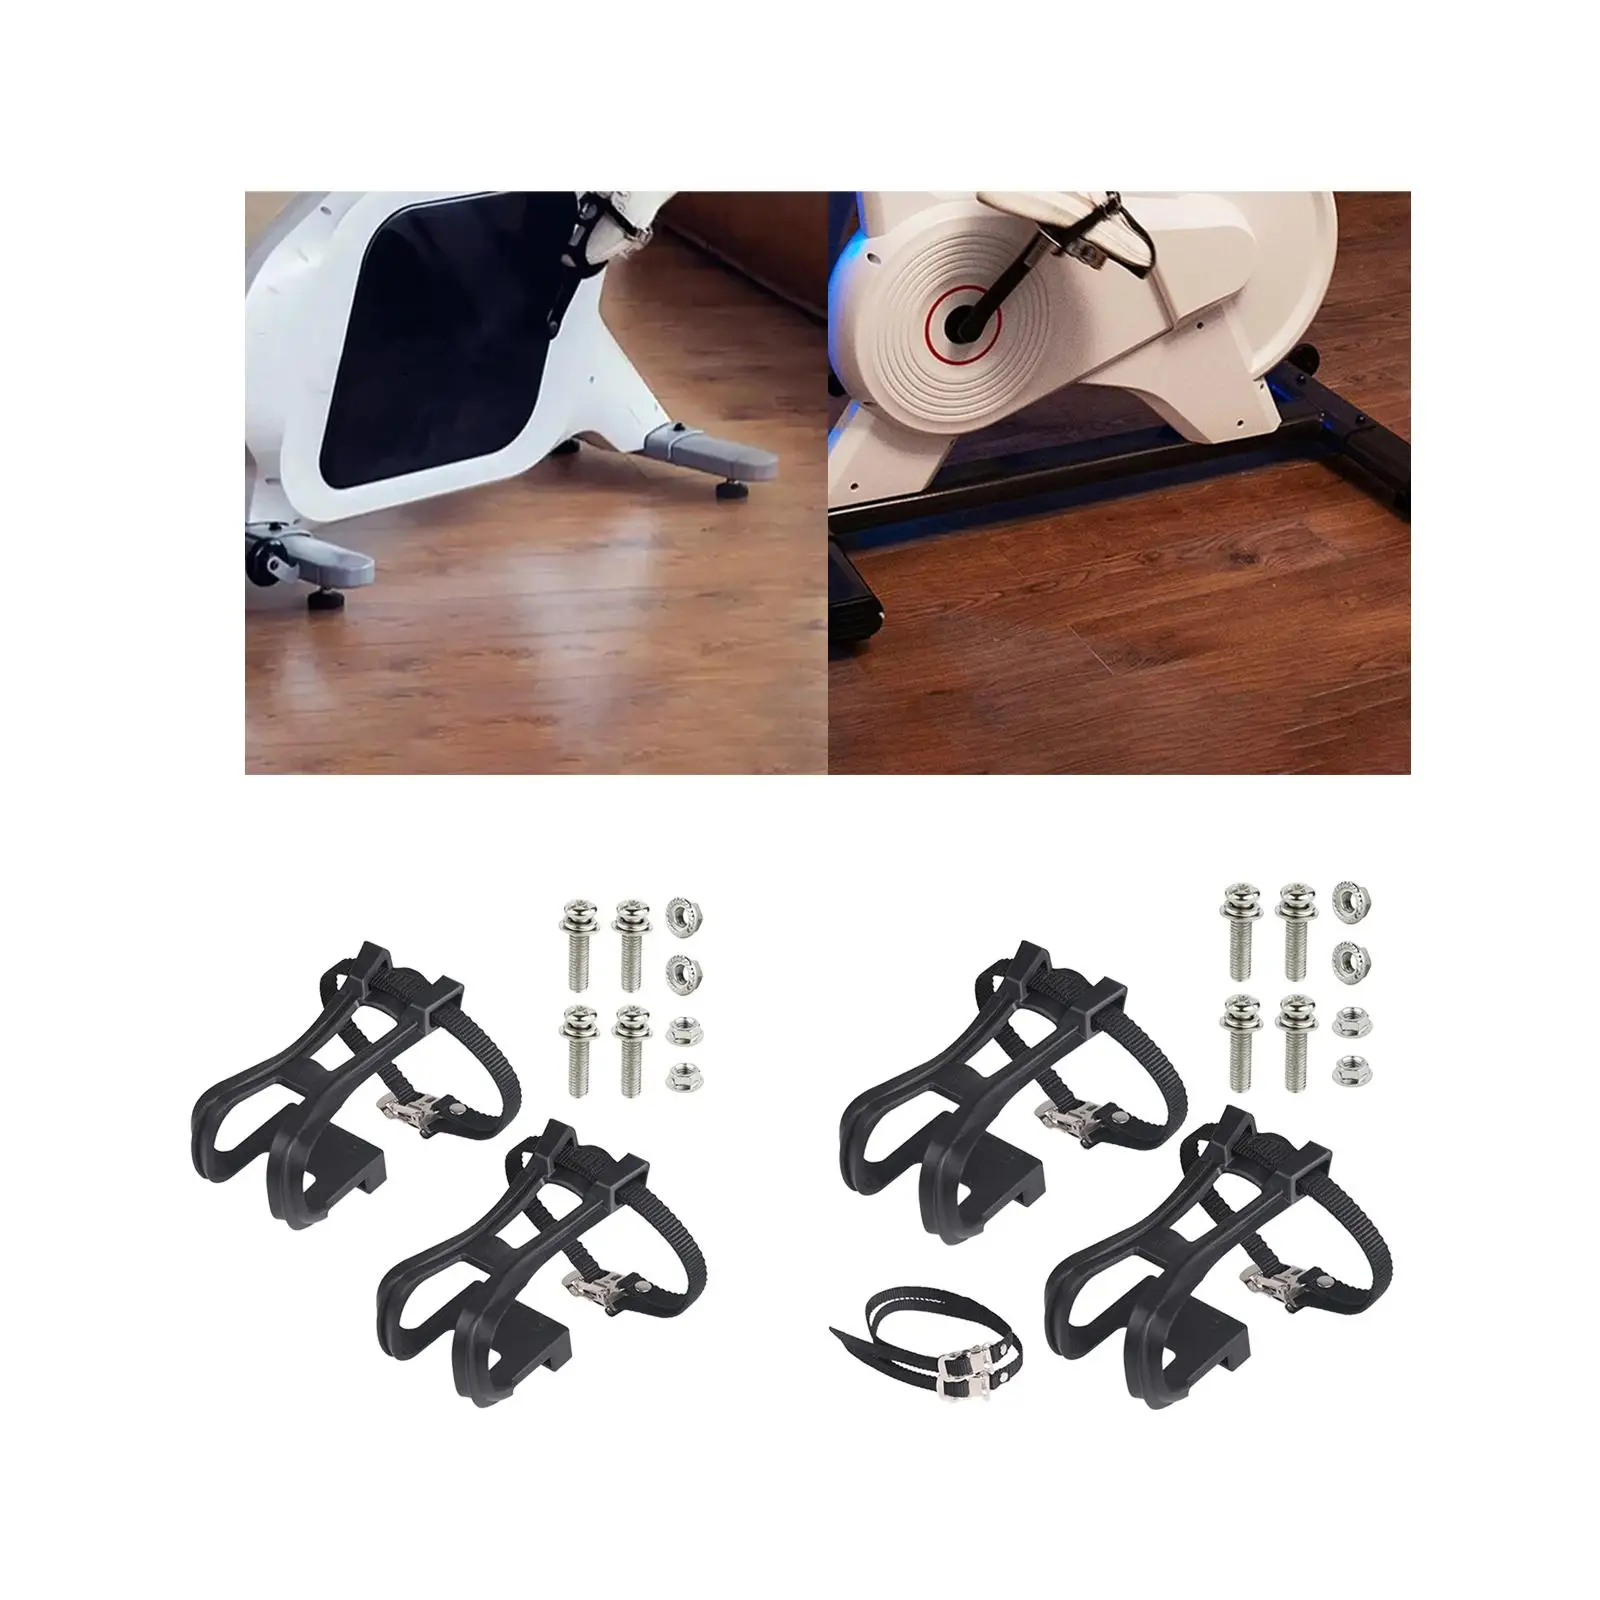 Bike Pedal Straps Pedal Clips Straps Durable Bicycle Feet Strap Footrest Strips for Mountain Indoor Gym Sports